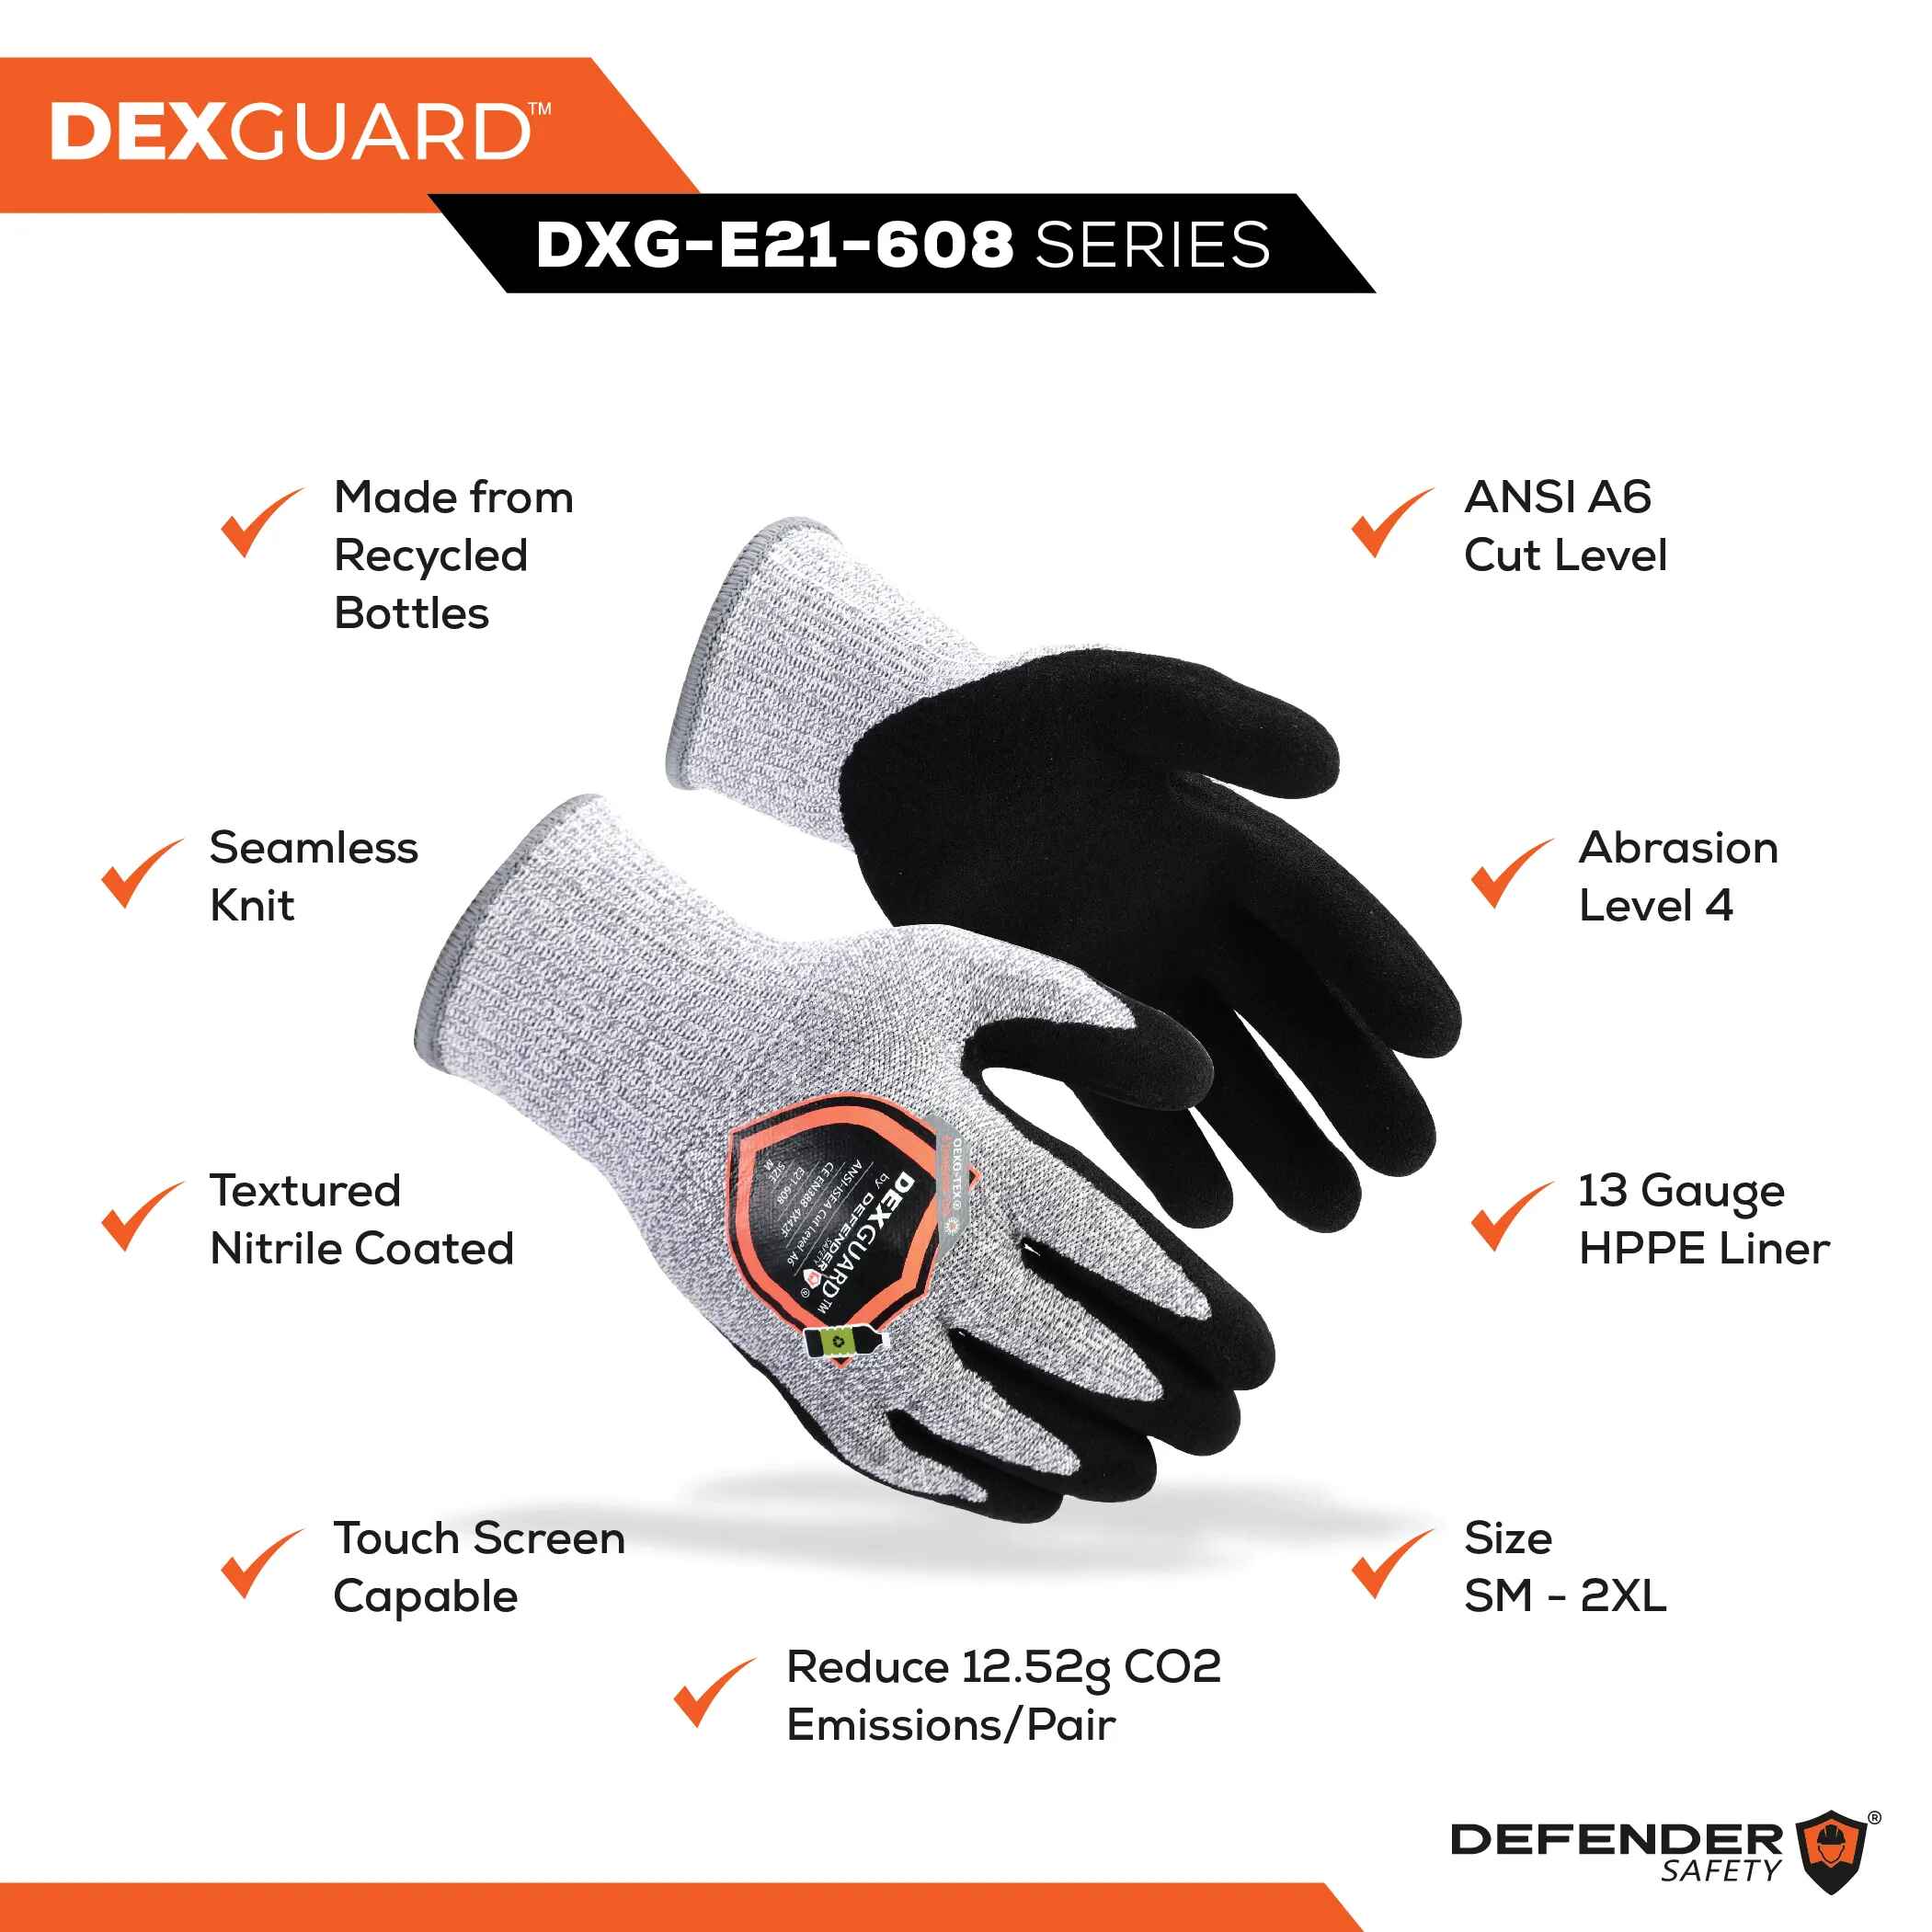 Work Gloves with Textured Firm Grip Coating LARGE SIZE -8 Pack